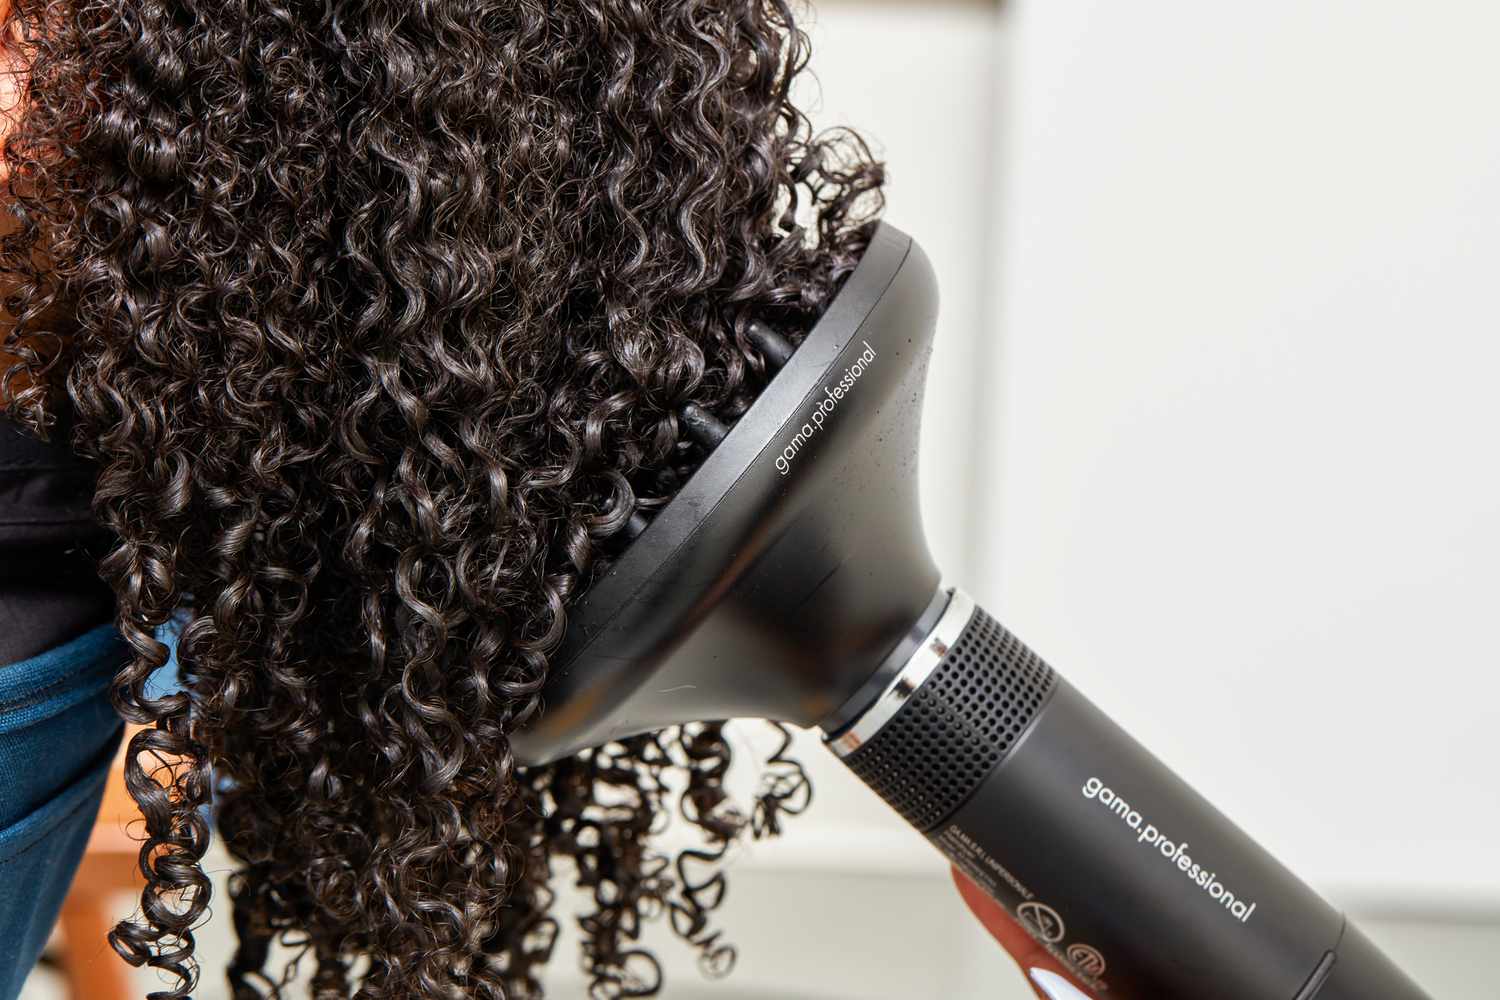 How To Make Hair Fluffy With Hair Dryer